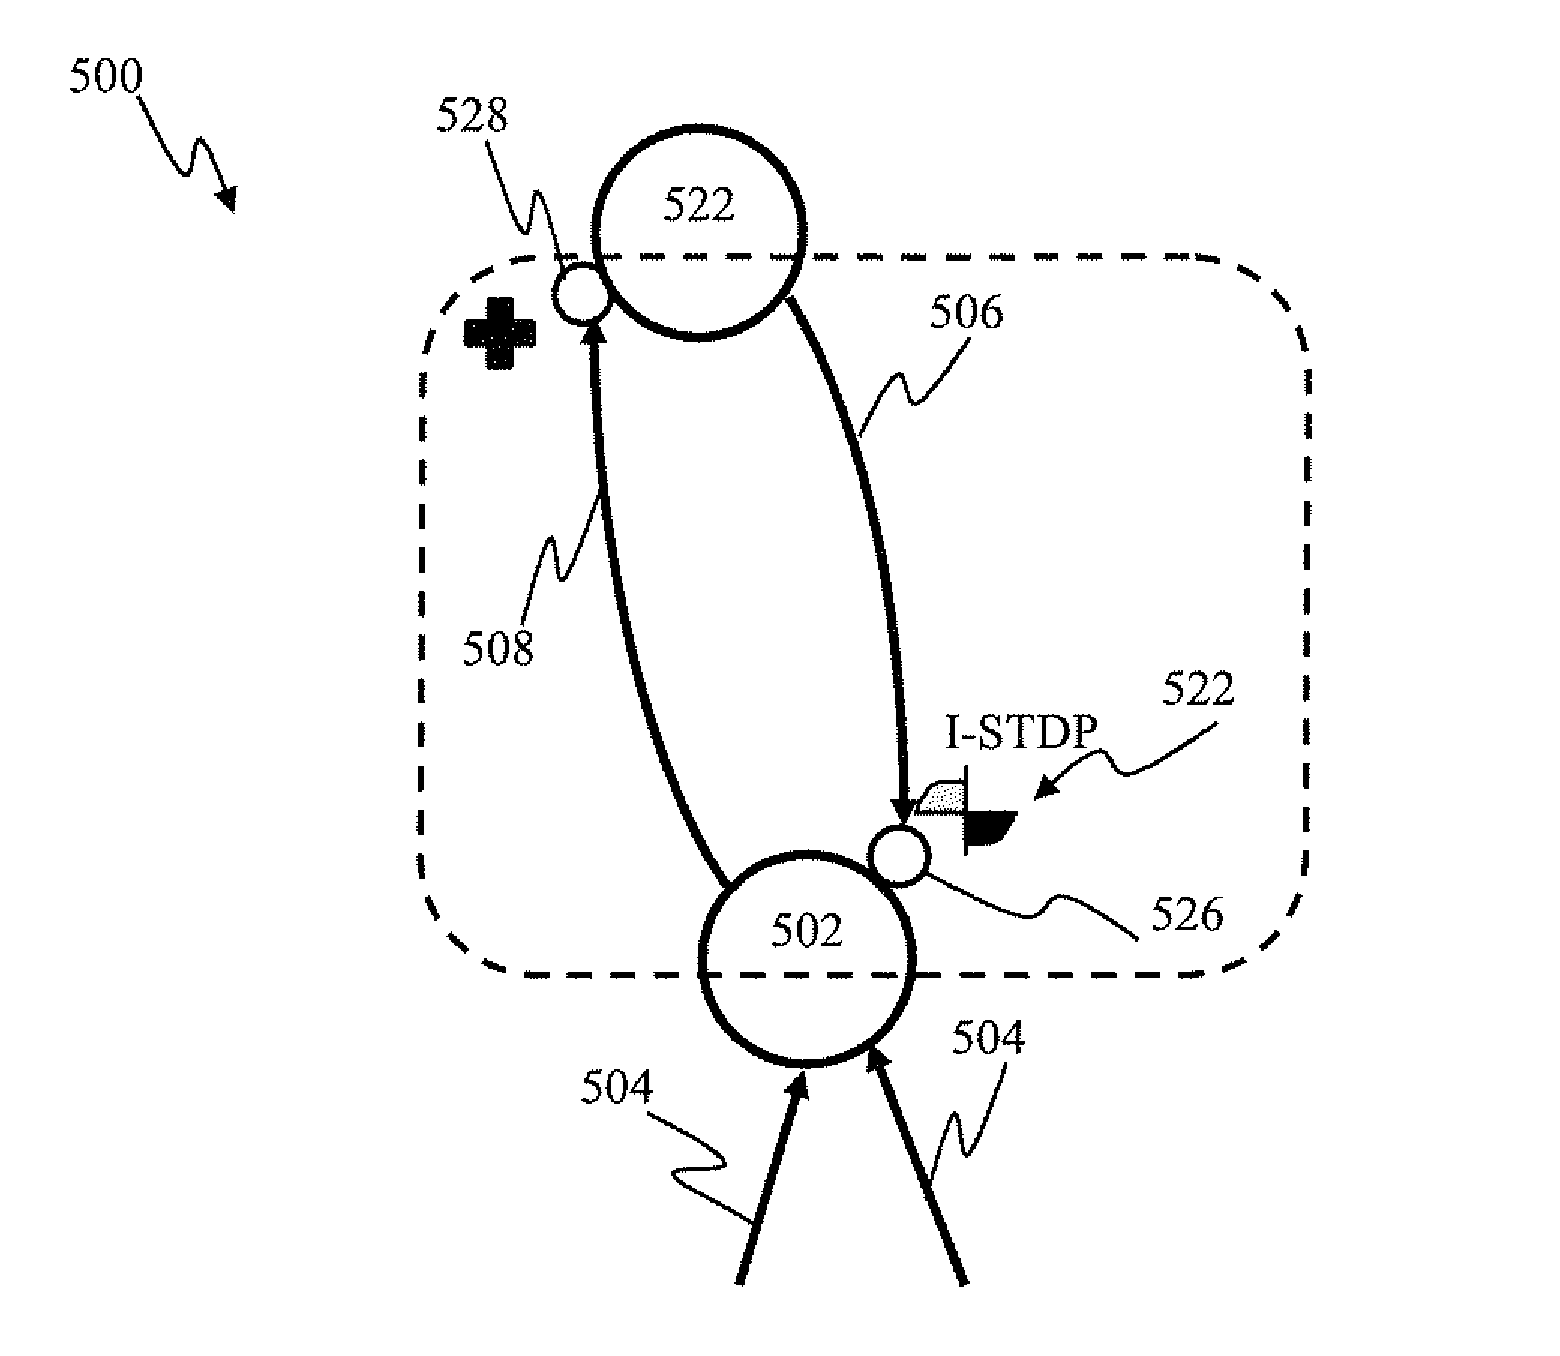 Spiking neural network object recognition apparatus and methods